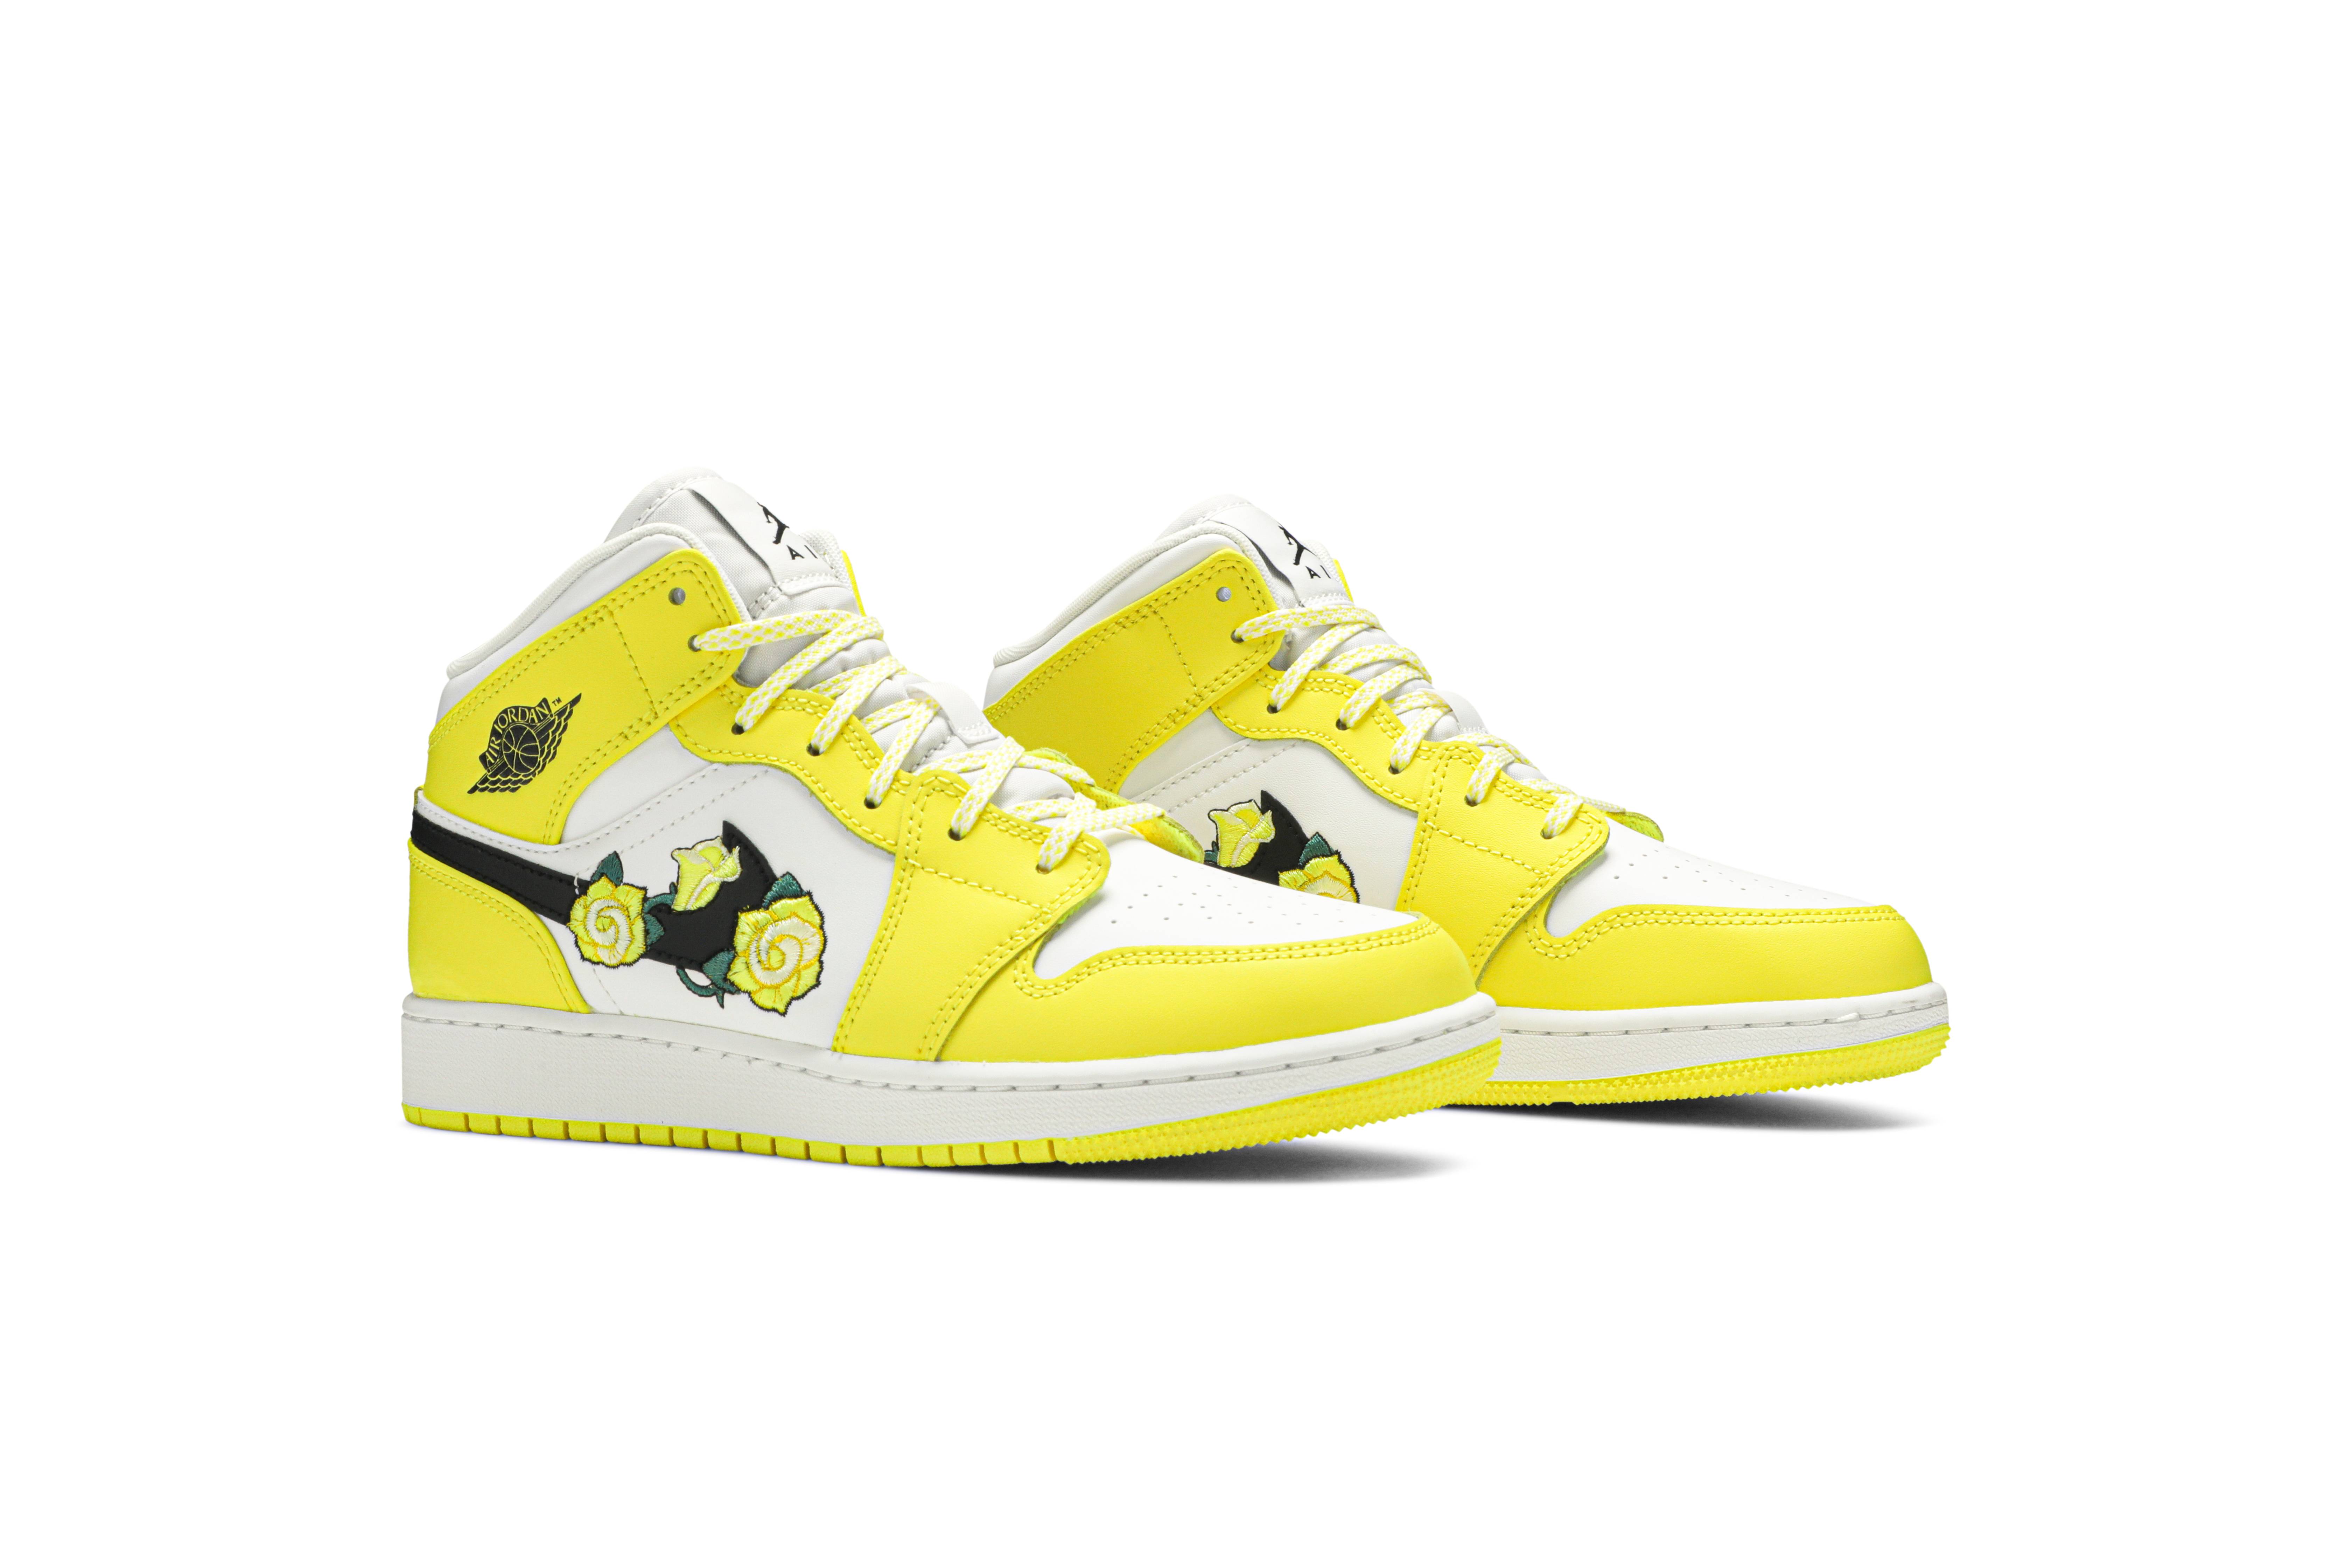 jordans with yellow roses